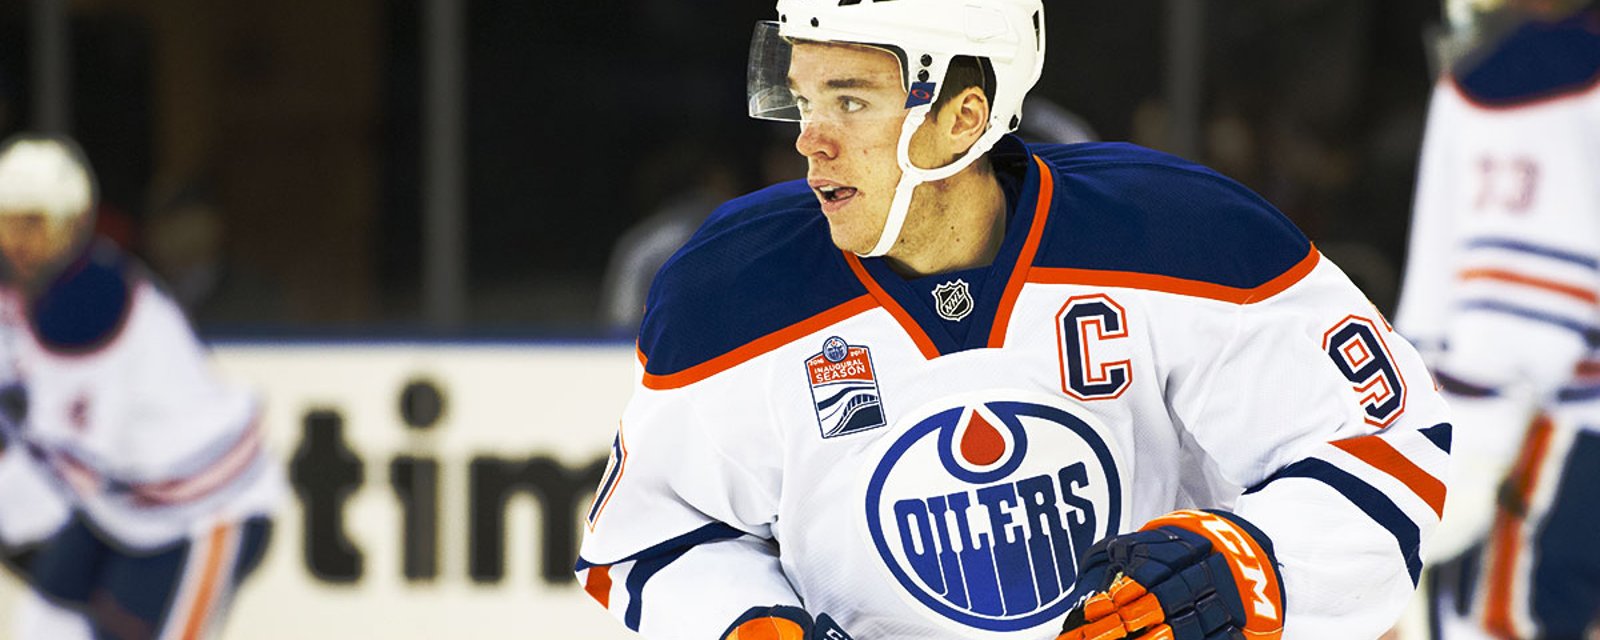 The Oilers are having a tough time dealing with Connor McDavid!